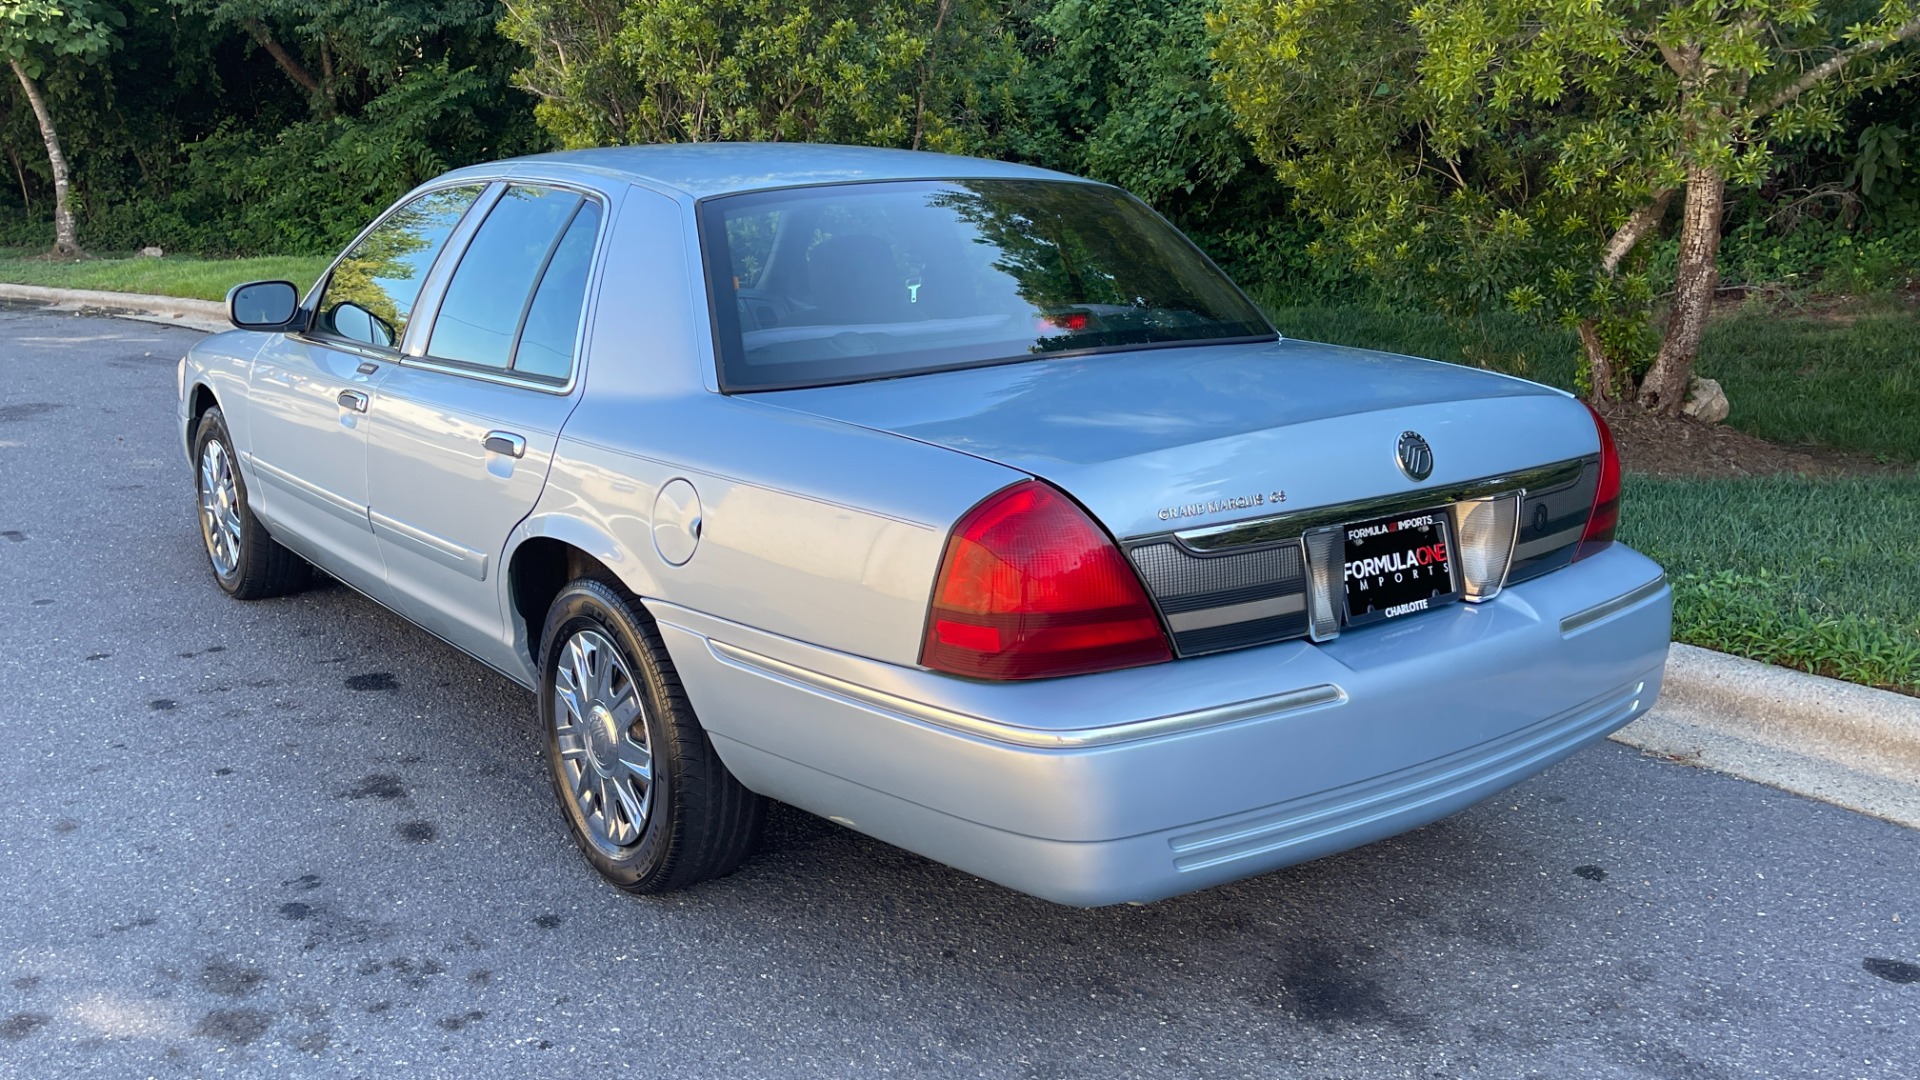 Used 2008 Mercury Grand Marquis GS / KEYLESS ENTRY / 8 WAY DRIVER SEAT / GS CONFIDENCE for sale $11,999 at Formula Imports in Charlotte NC 28227 4